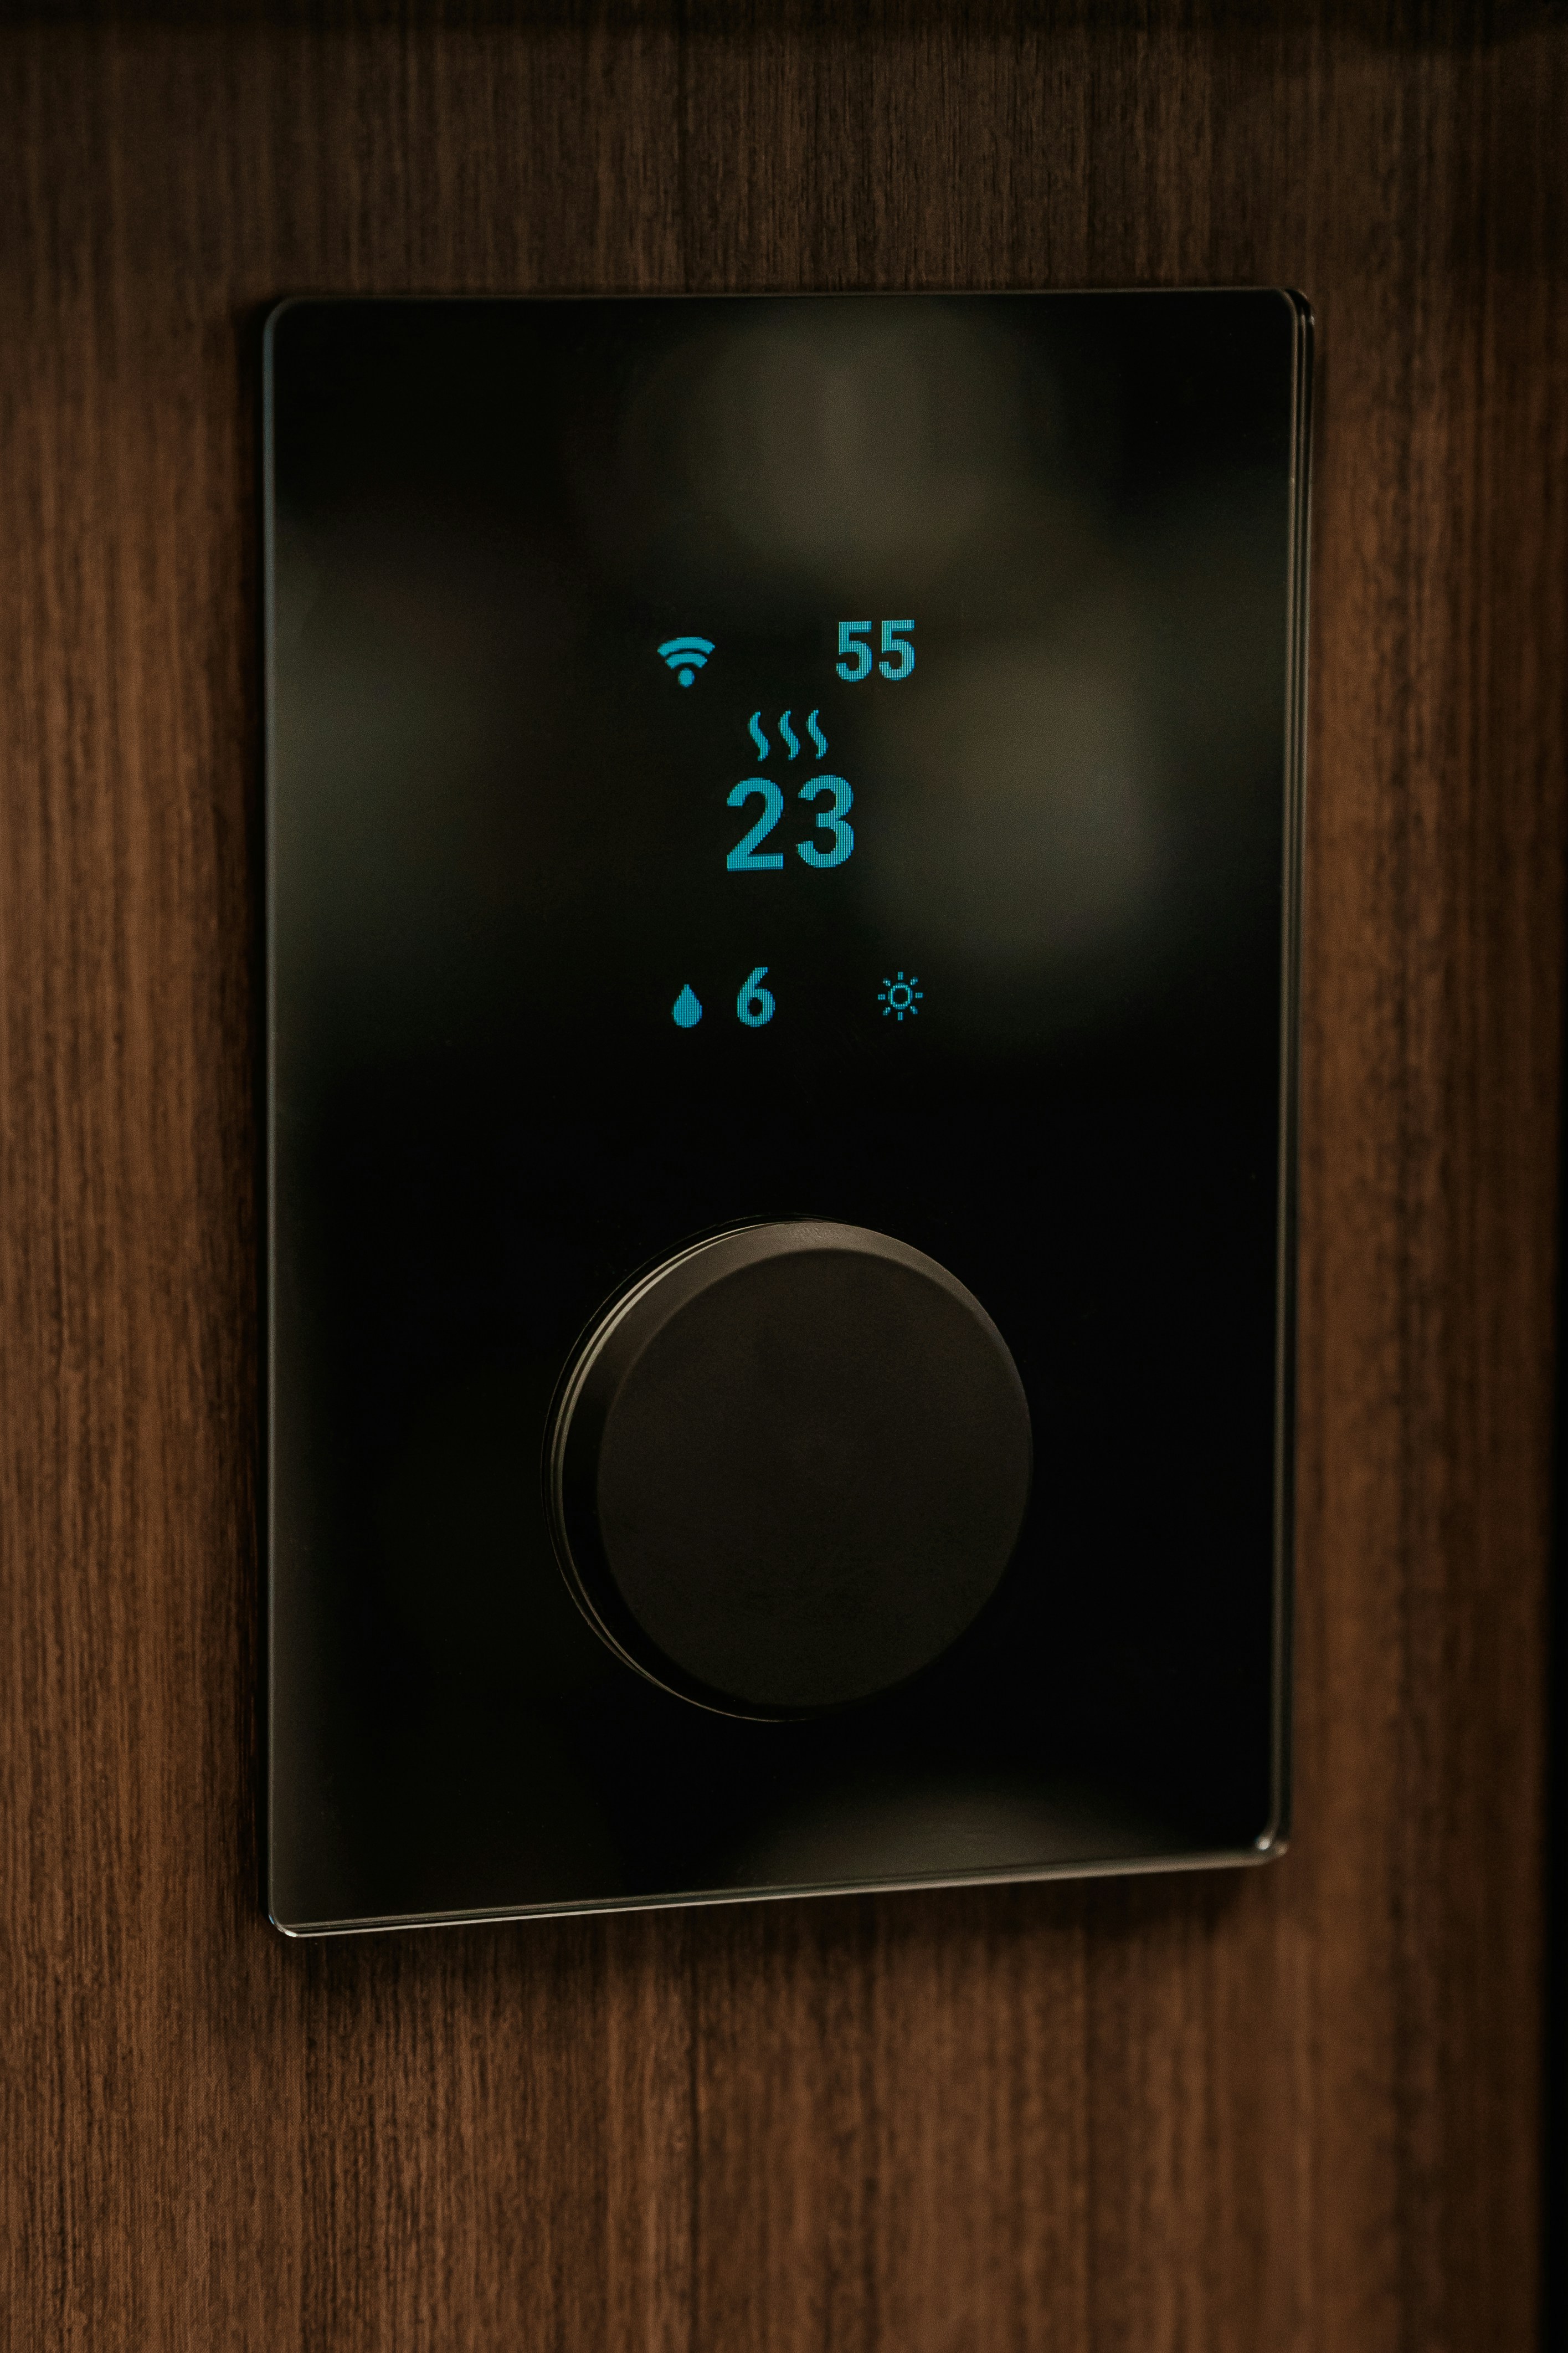 UKU Glass sauna controller makes sauna heating easy and comfortable. With UKU you can heat your sauna on the spot or do it from your phone through HUUM mobile app. HUUM mobile app works with UKU Wi-Fi and UKU GSM control units. UKU comes with several safety and extra features for a pleasant sauna experience. It can be used with different manufacturers’ heaters.